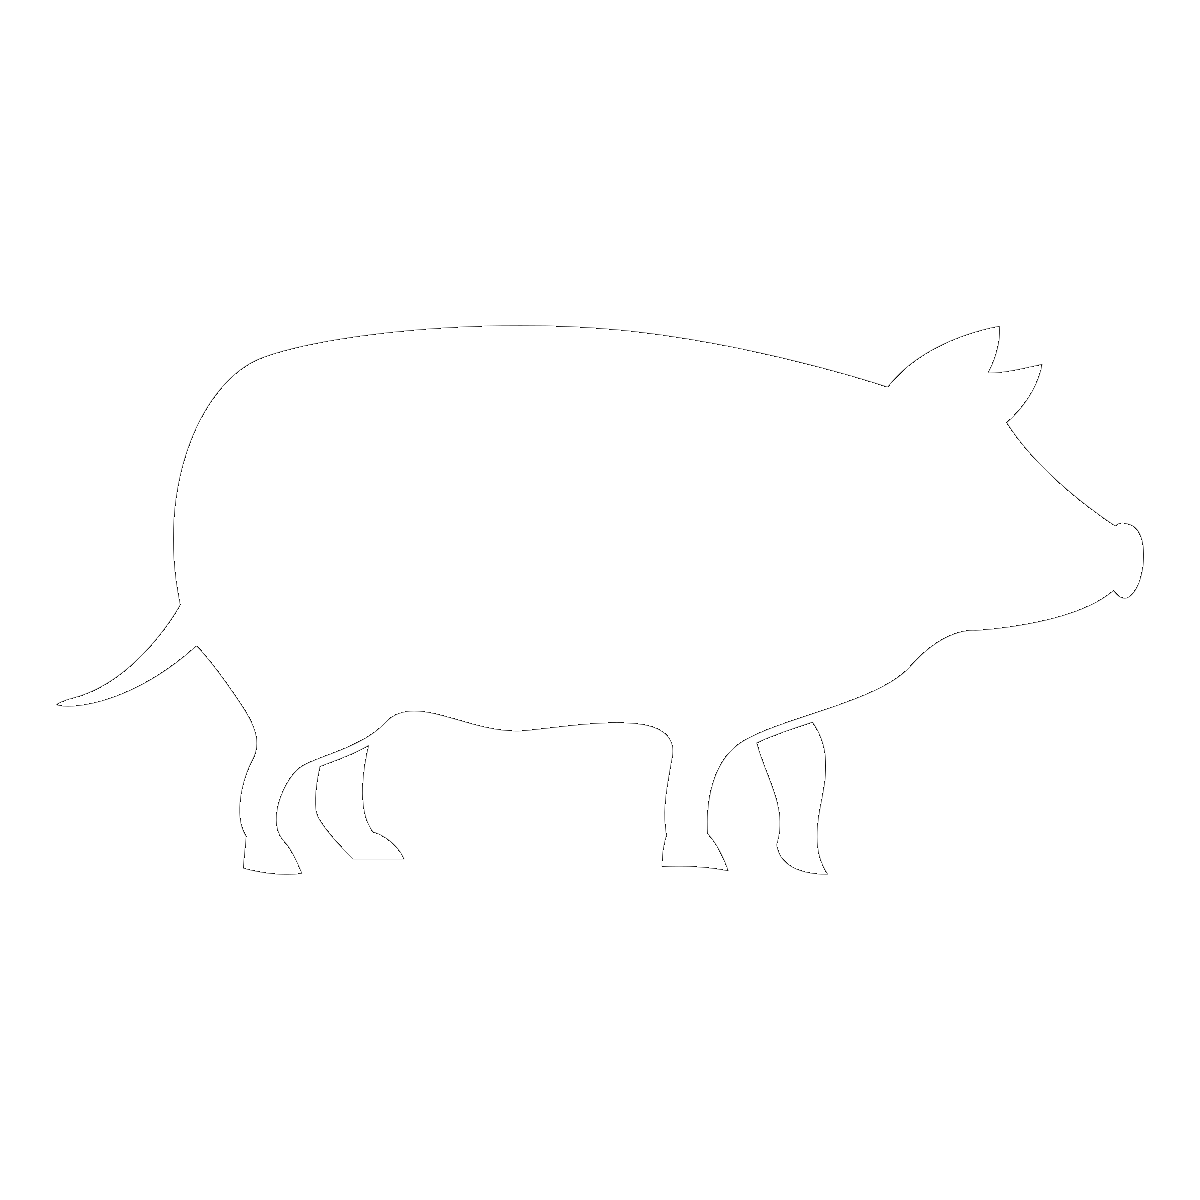 Symbol Cooking the Pigs